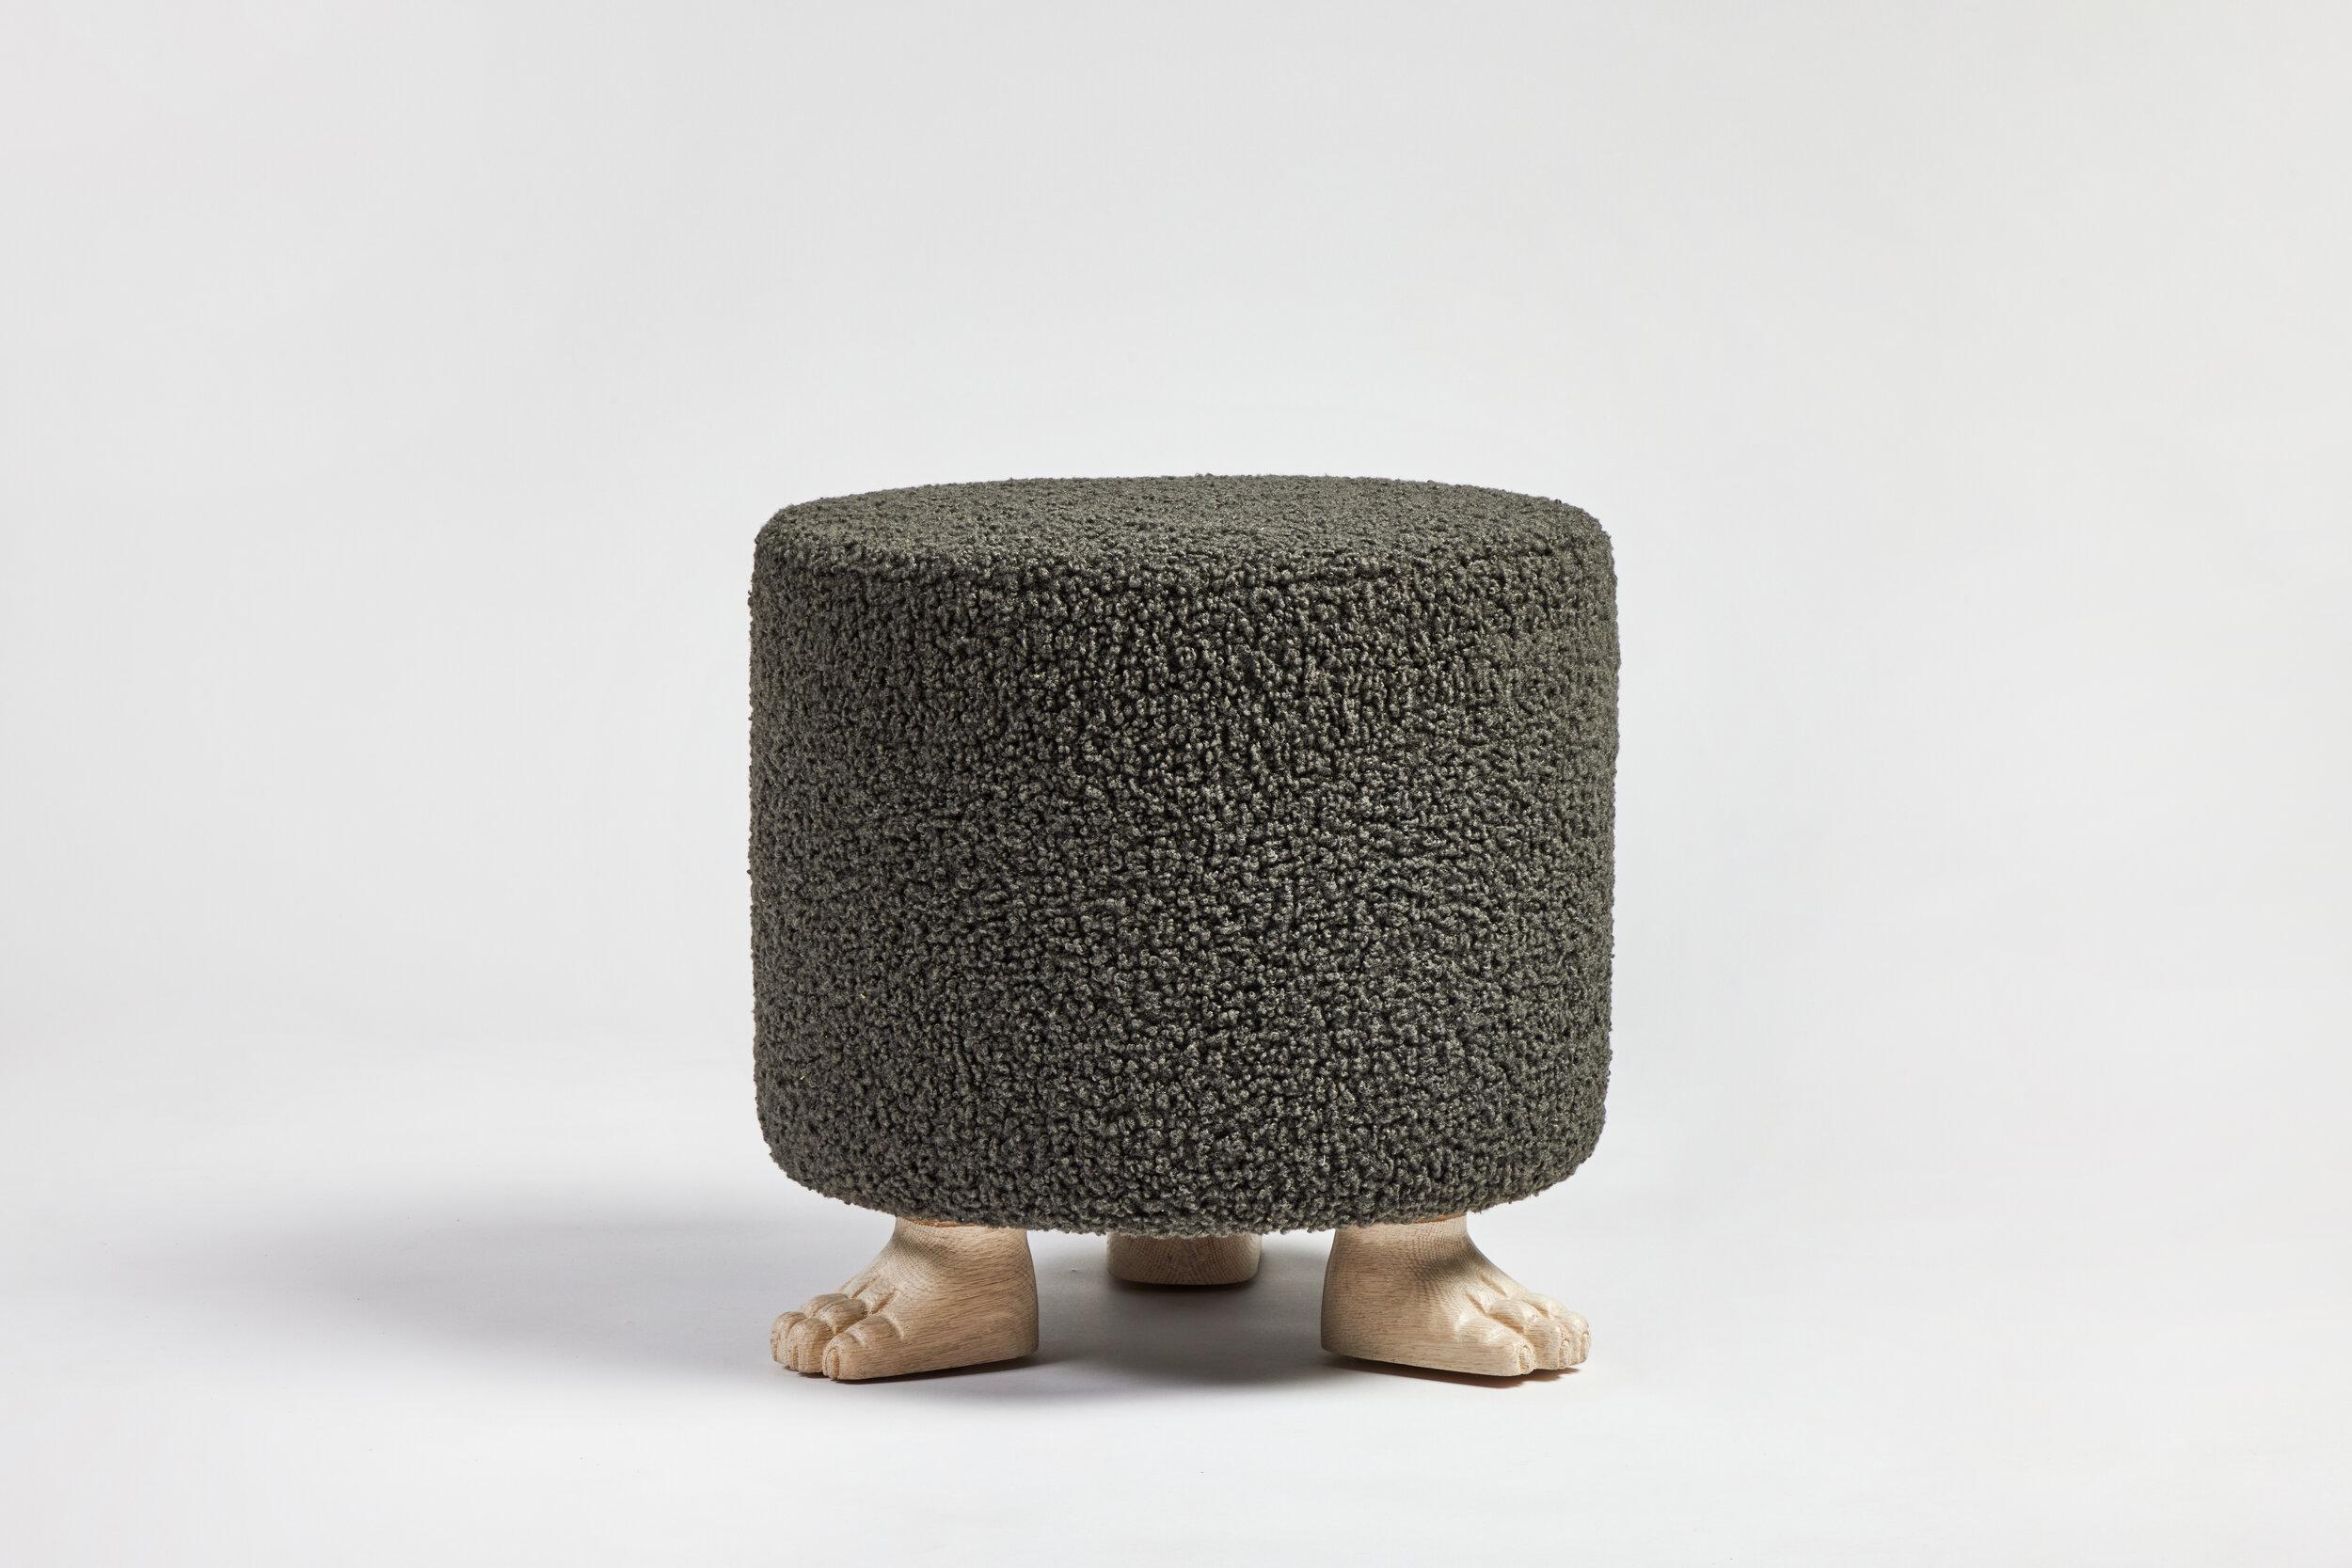 Martin & Brockett's Lupa Ottoman is named after Lupa, the she-wolf mother of Rome. It features three hand-carved wooden feet, shown in our Bleached finish on Oak. The Lupa Ottoman is a whimsical seating option to float next to a cocktail table, pull